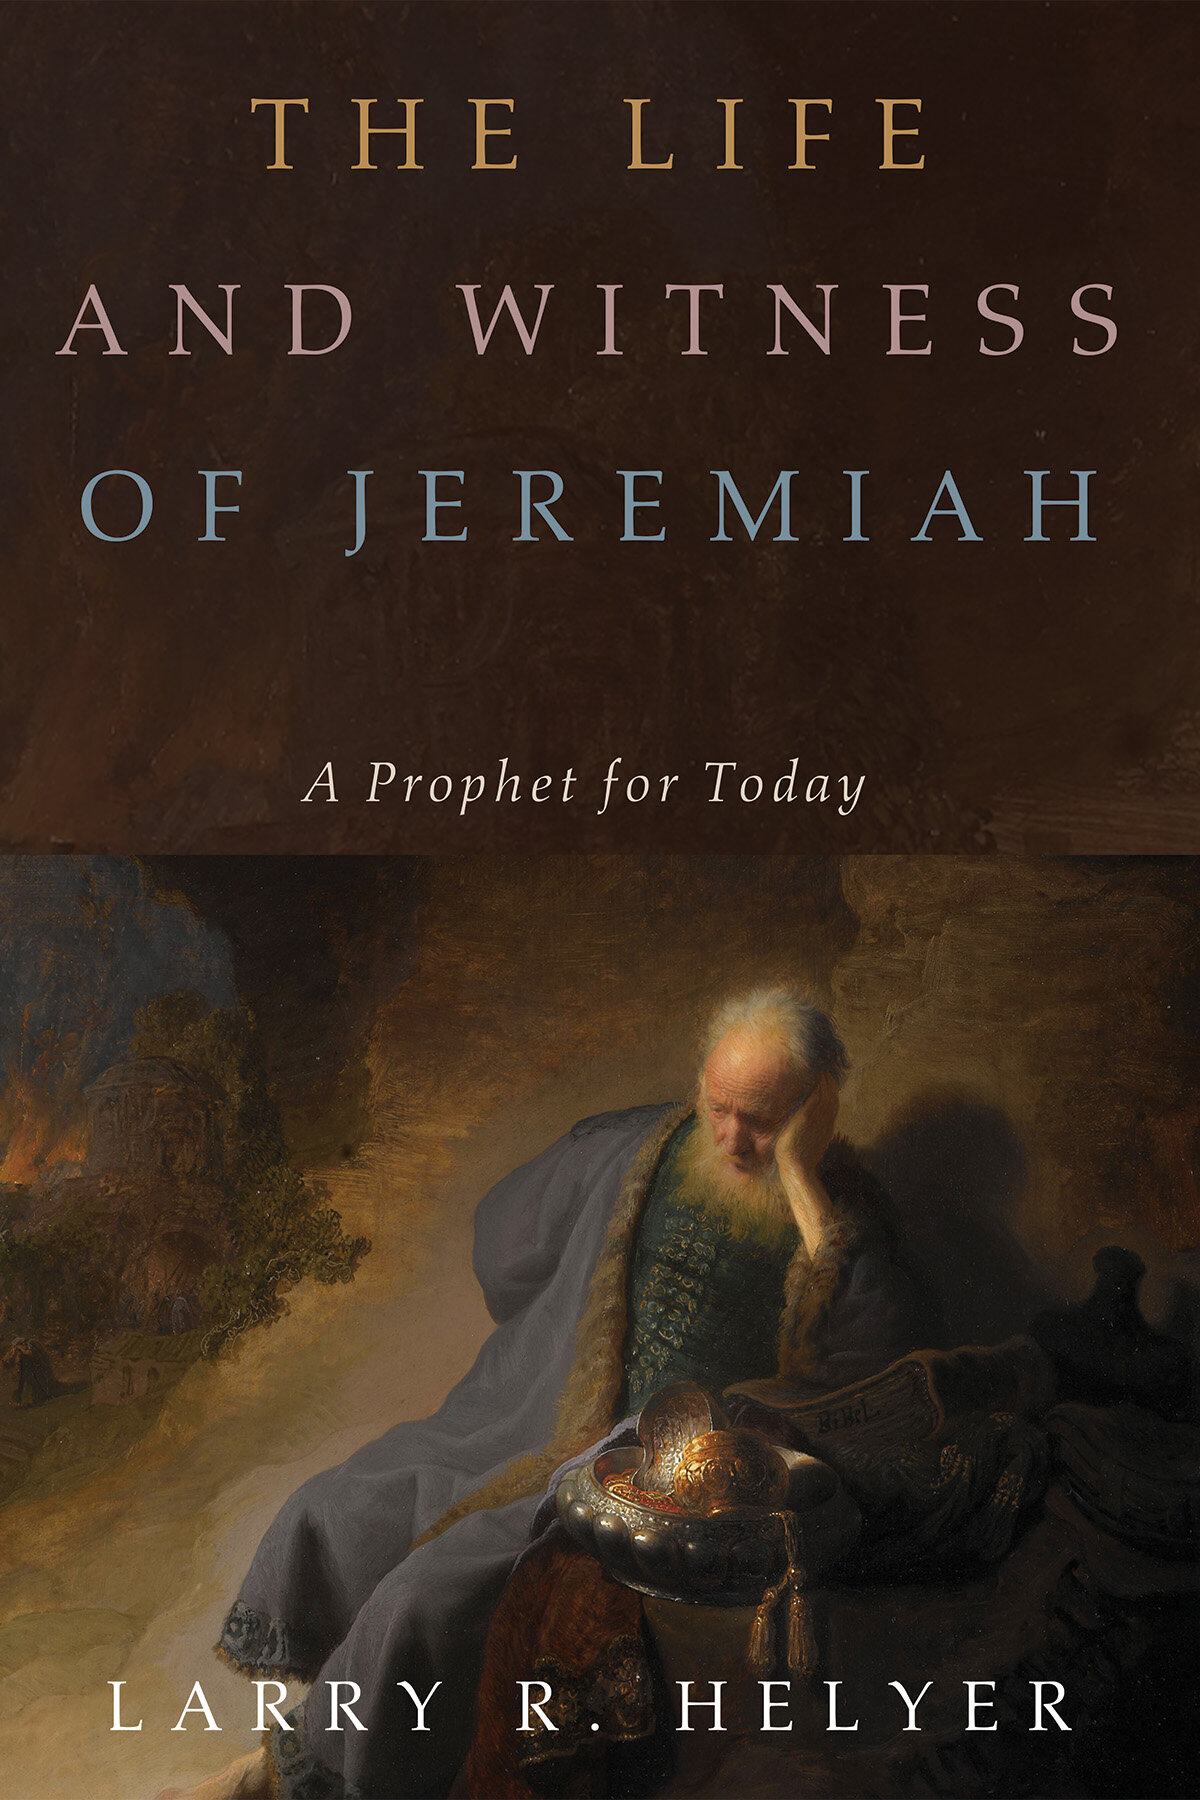 The Life and Witness of Jeremiah: A Prophet for Today